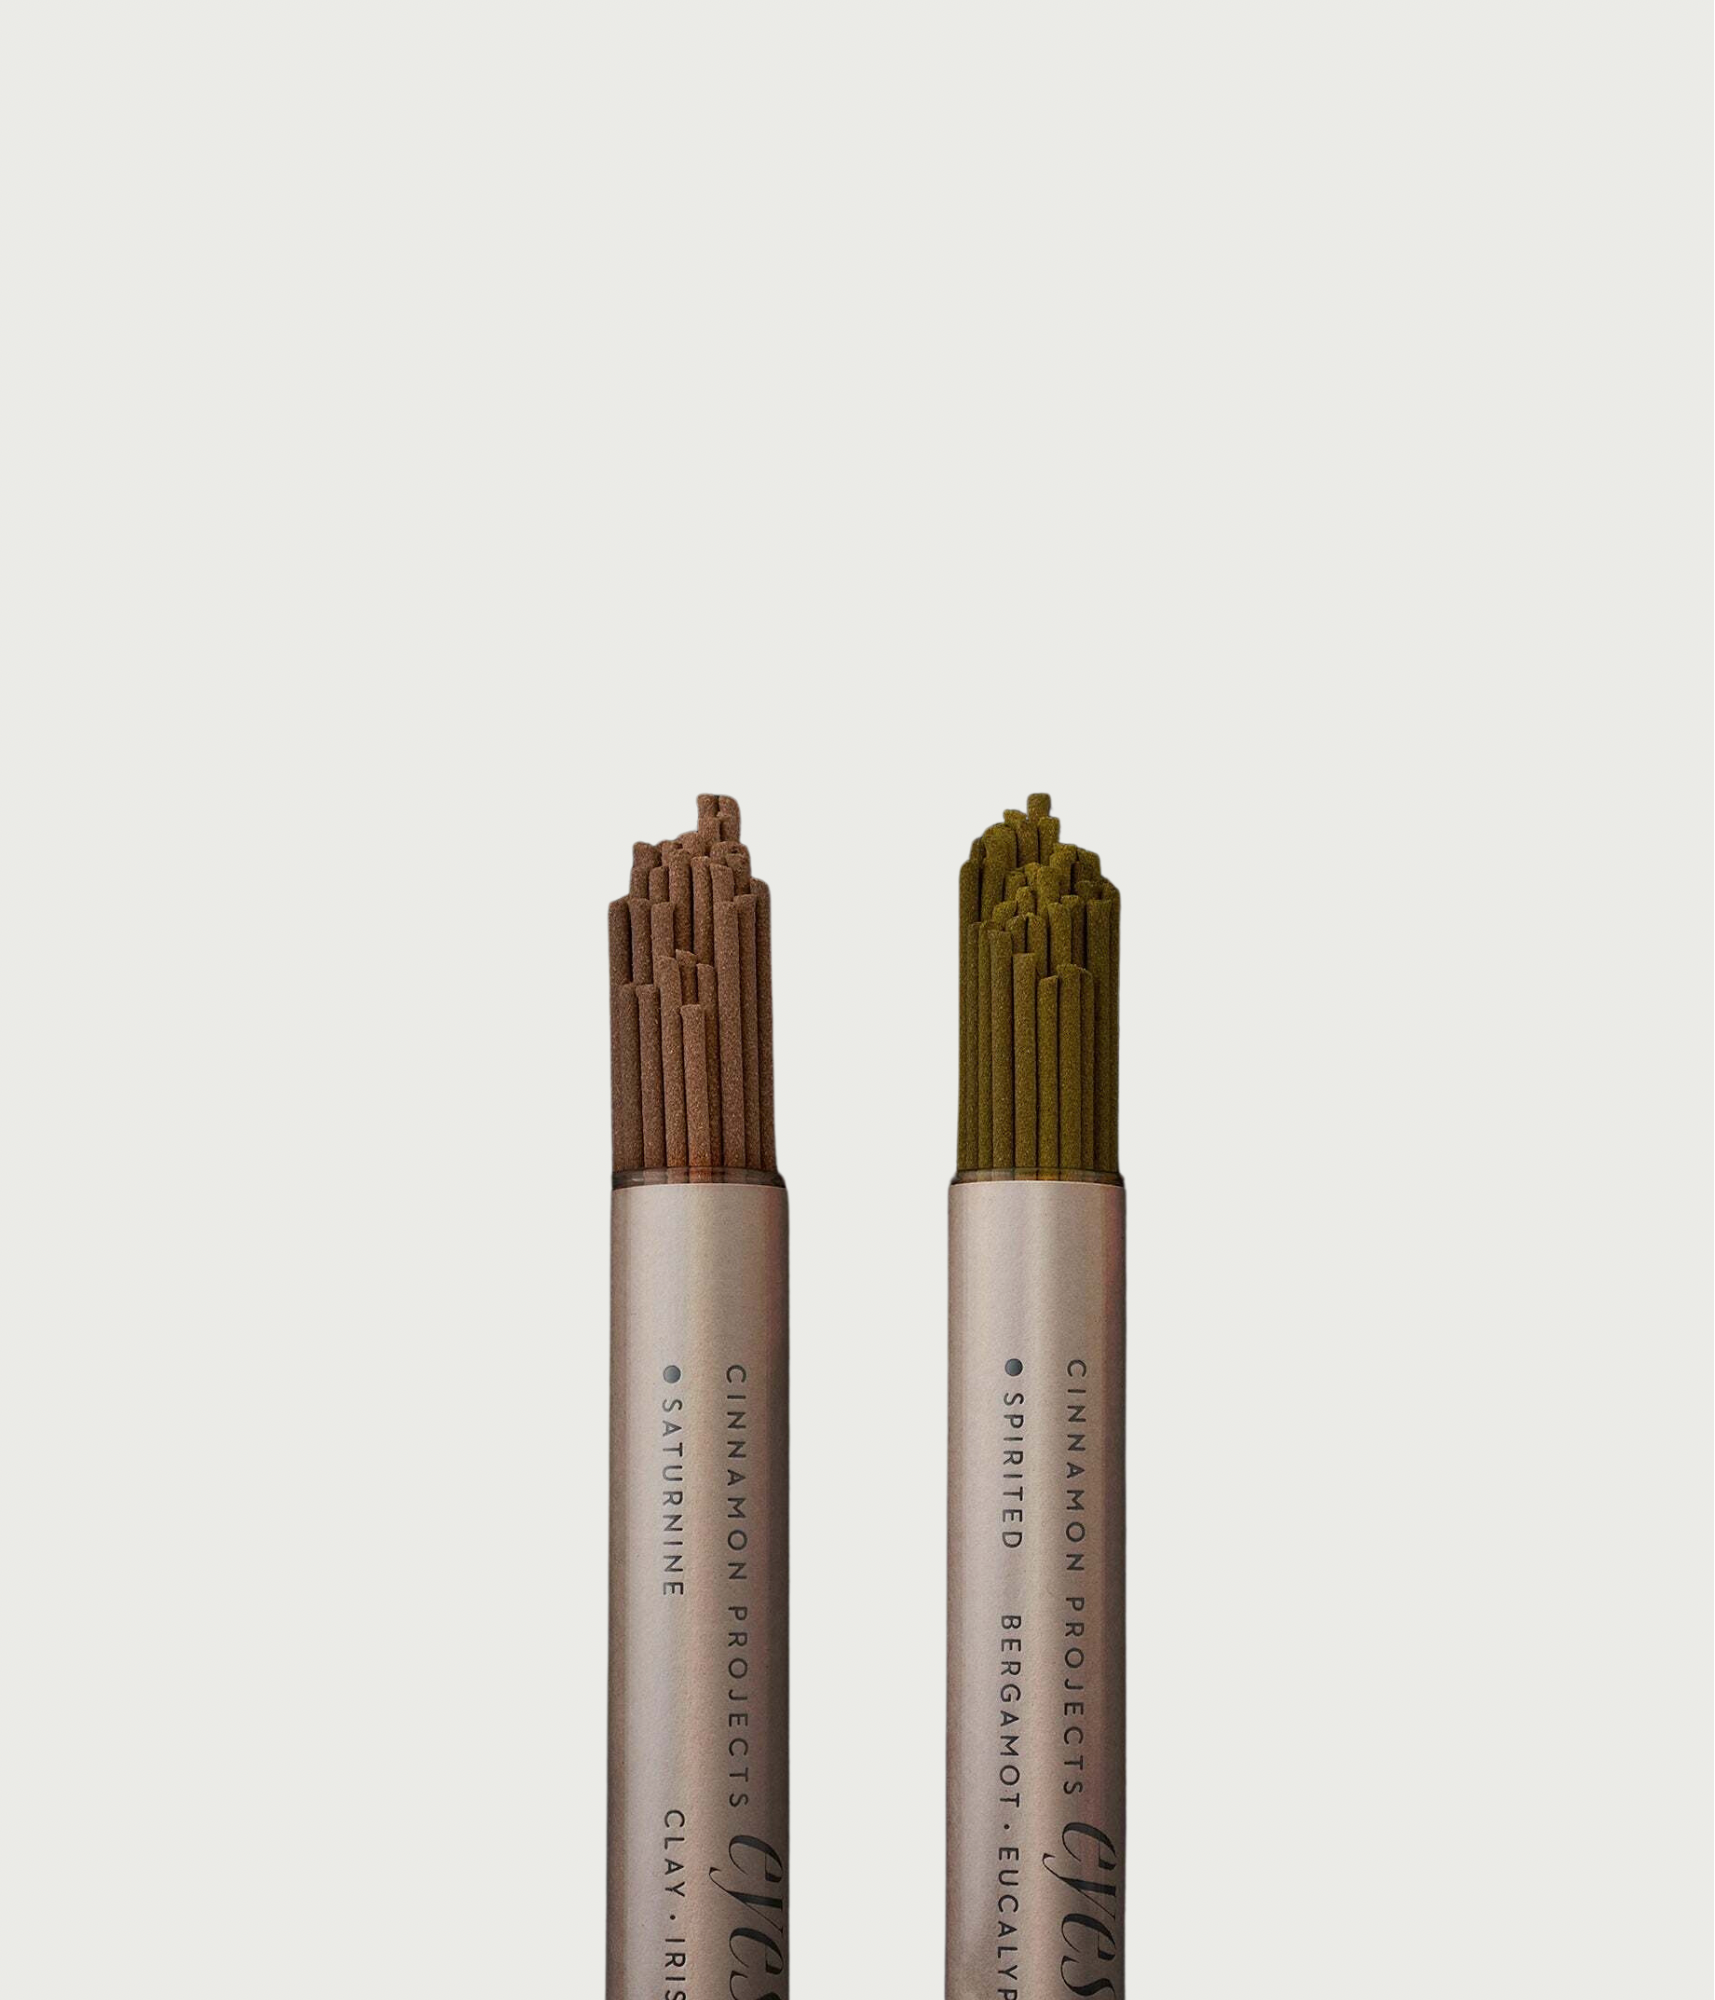 EyeSwoon Incense Duo